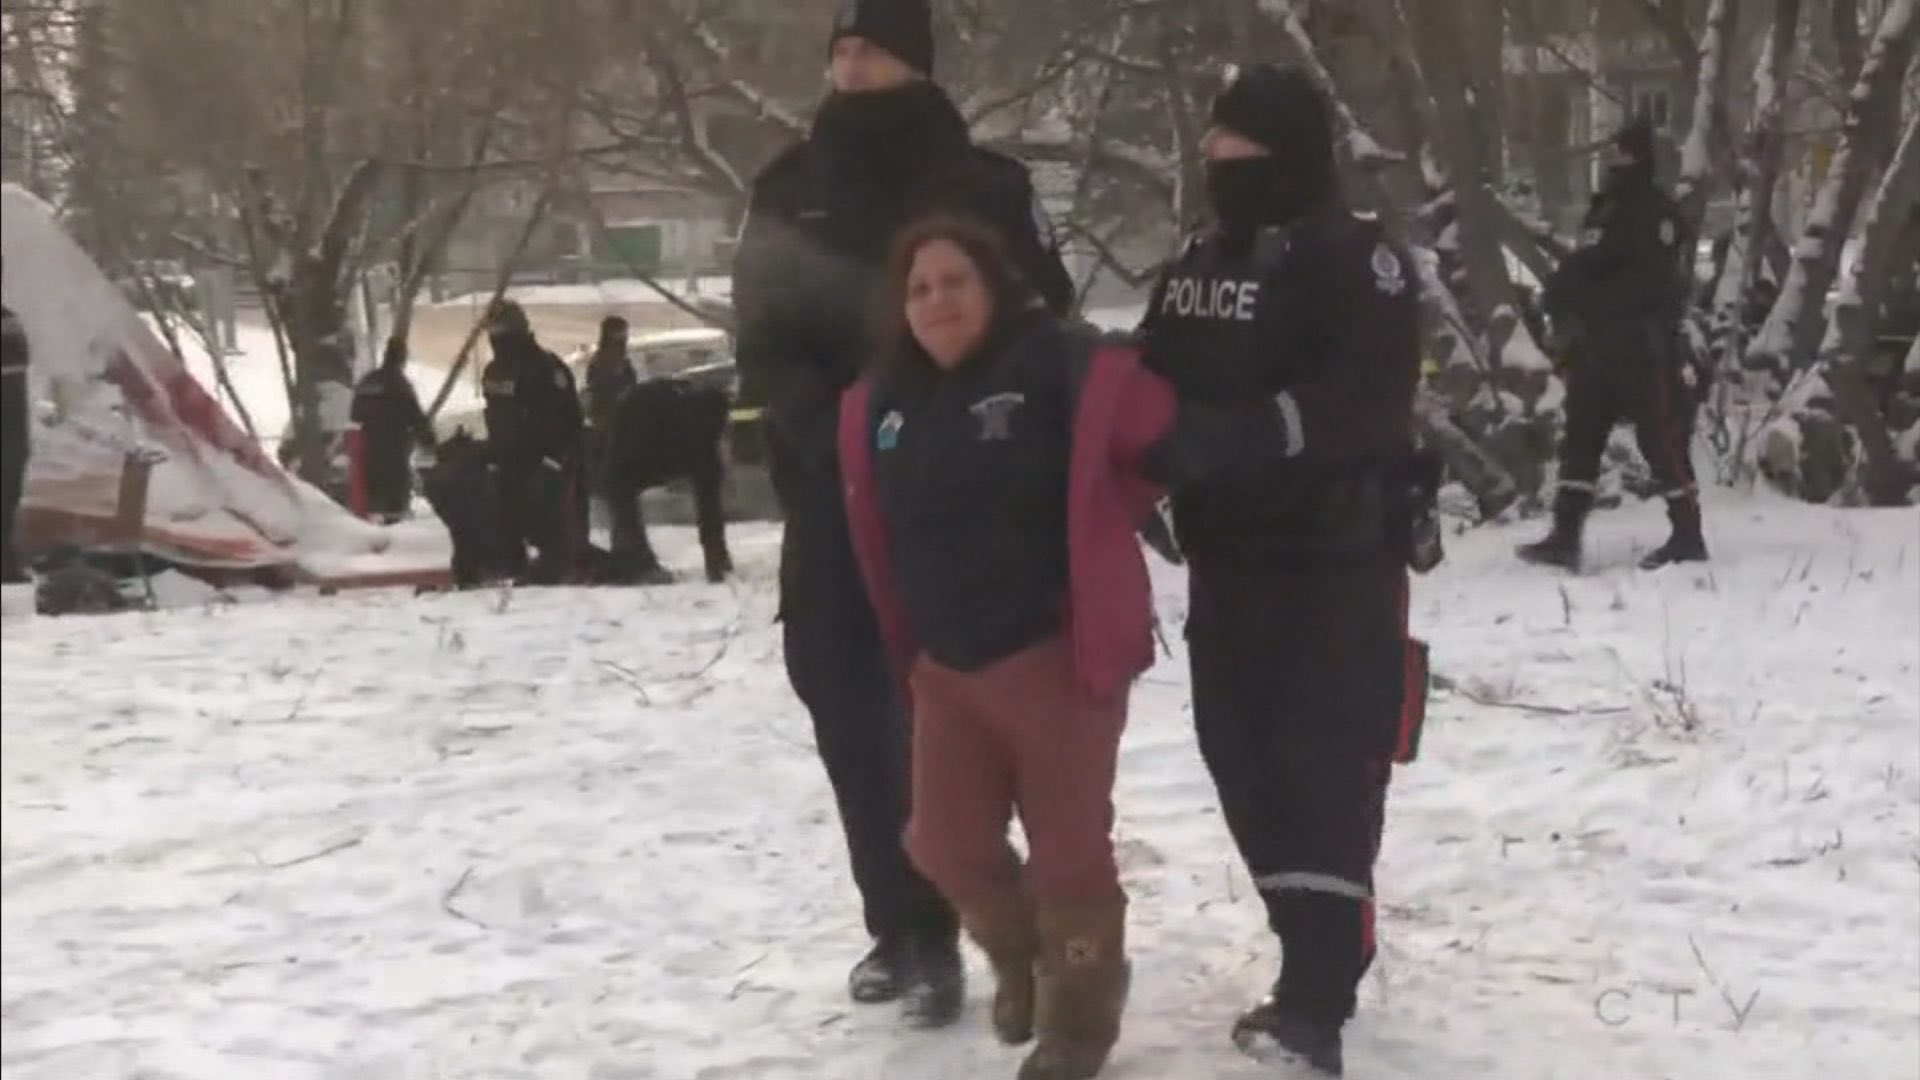 In this image Brandi Morin is being arrested by police officers and being taken away by one on either side